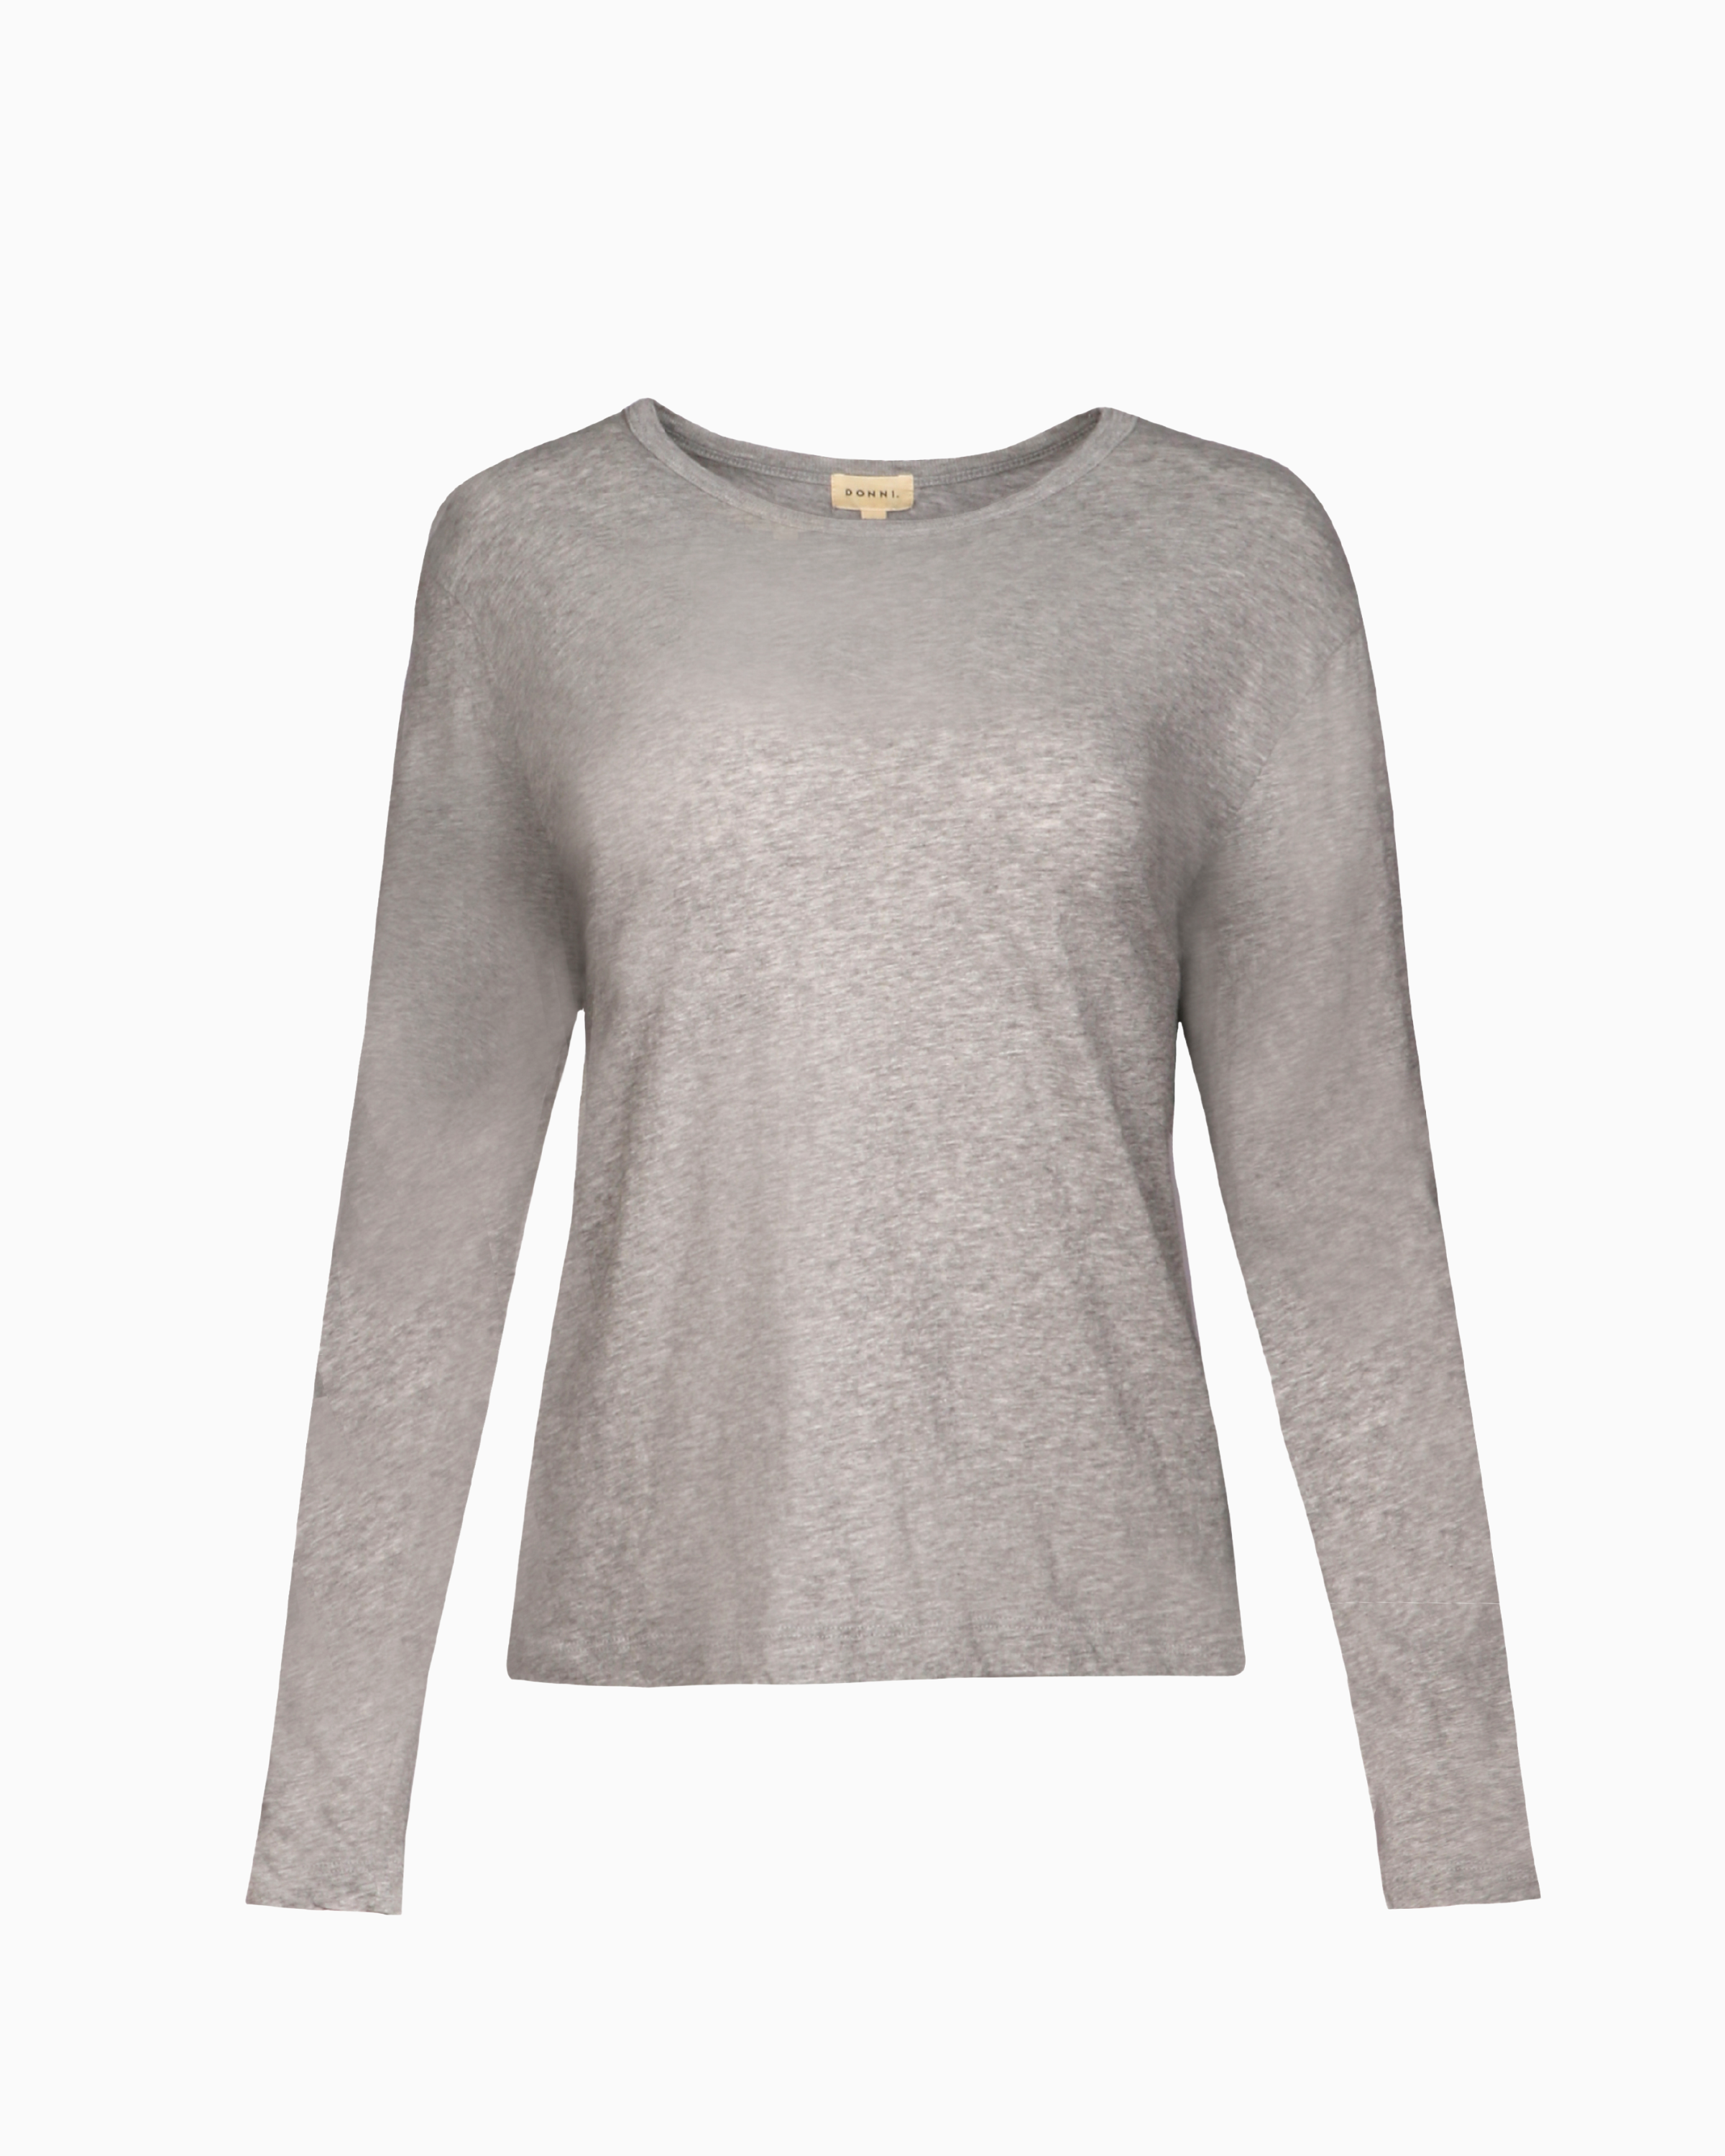 Donni Jersey Relaxed Long Sleeve Tee in Heather Grey